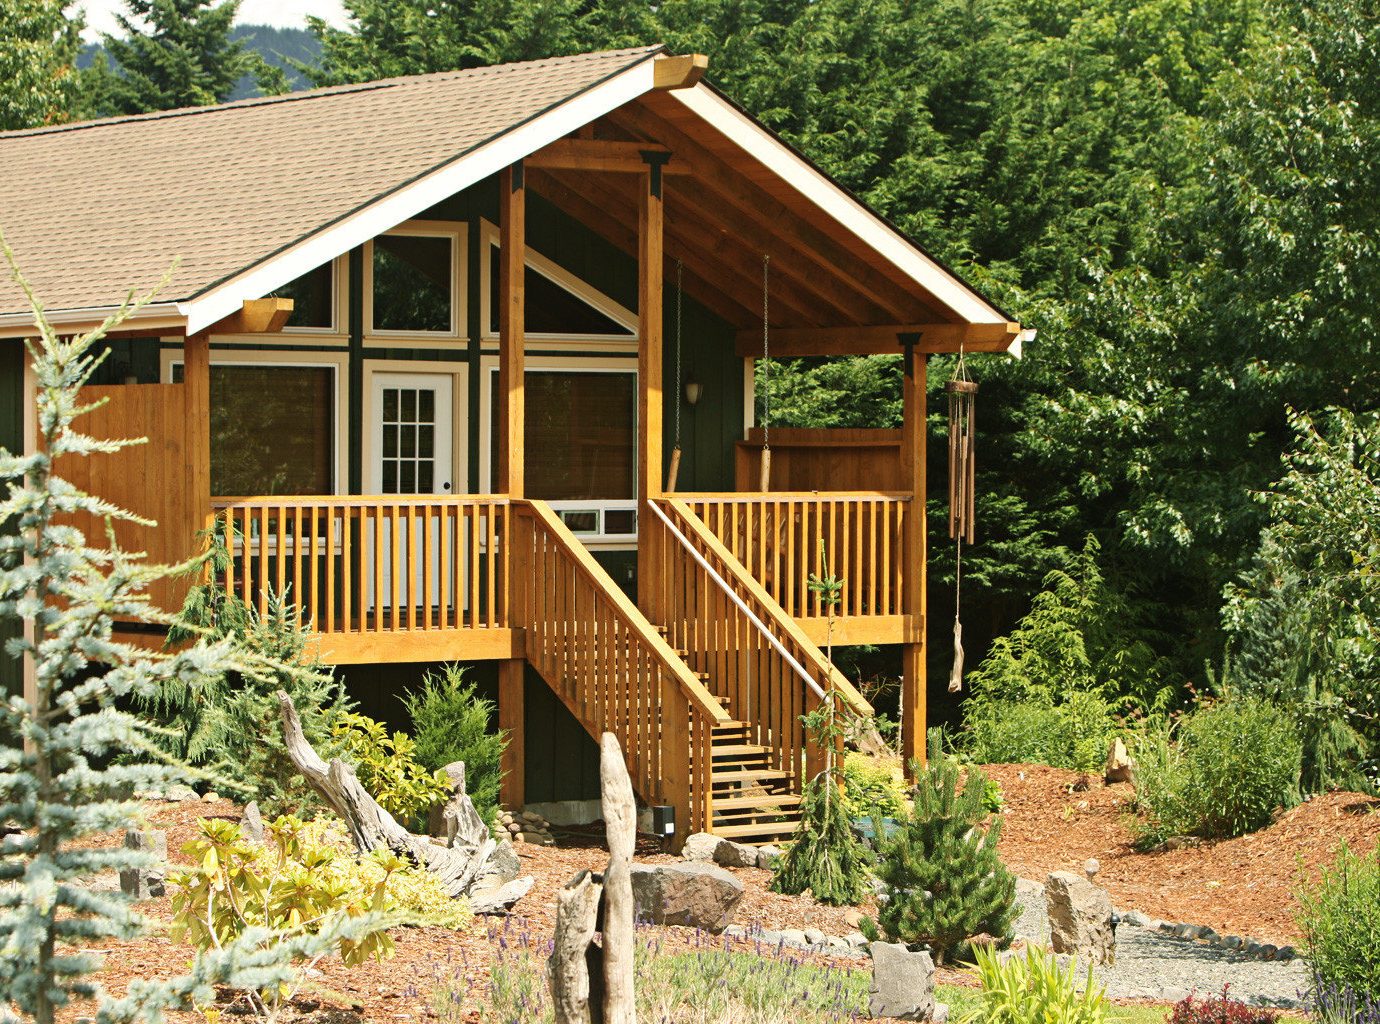 Cabin Exterior tree house building wooden log cabin rock shed yellow outdoor structure cottage Garden home backyard hut bushes surrounded